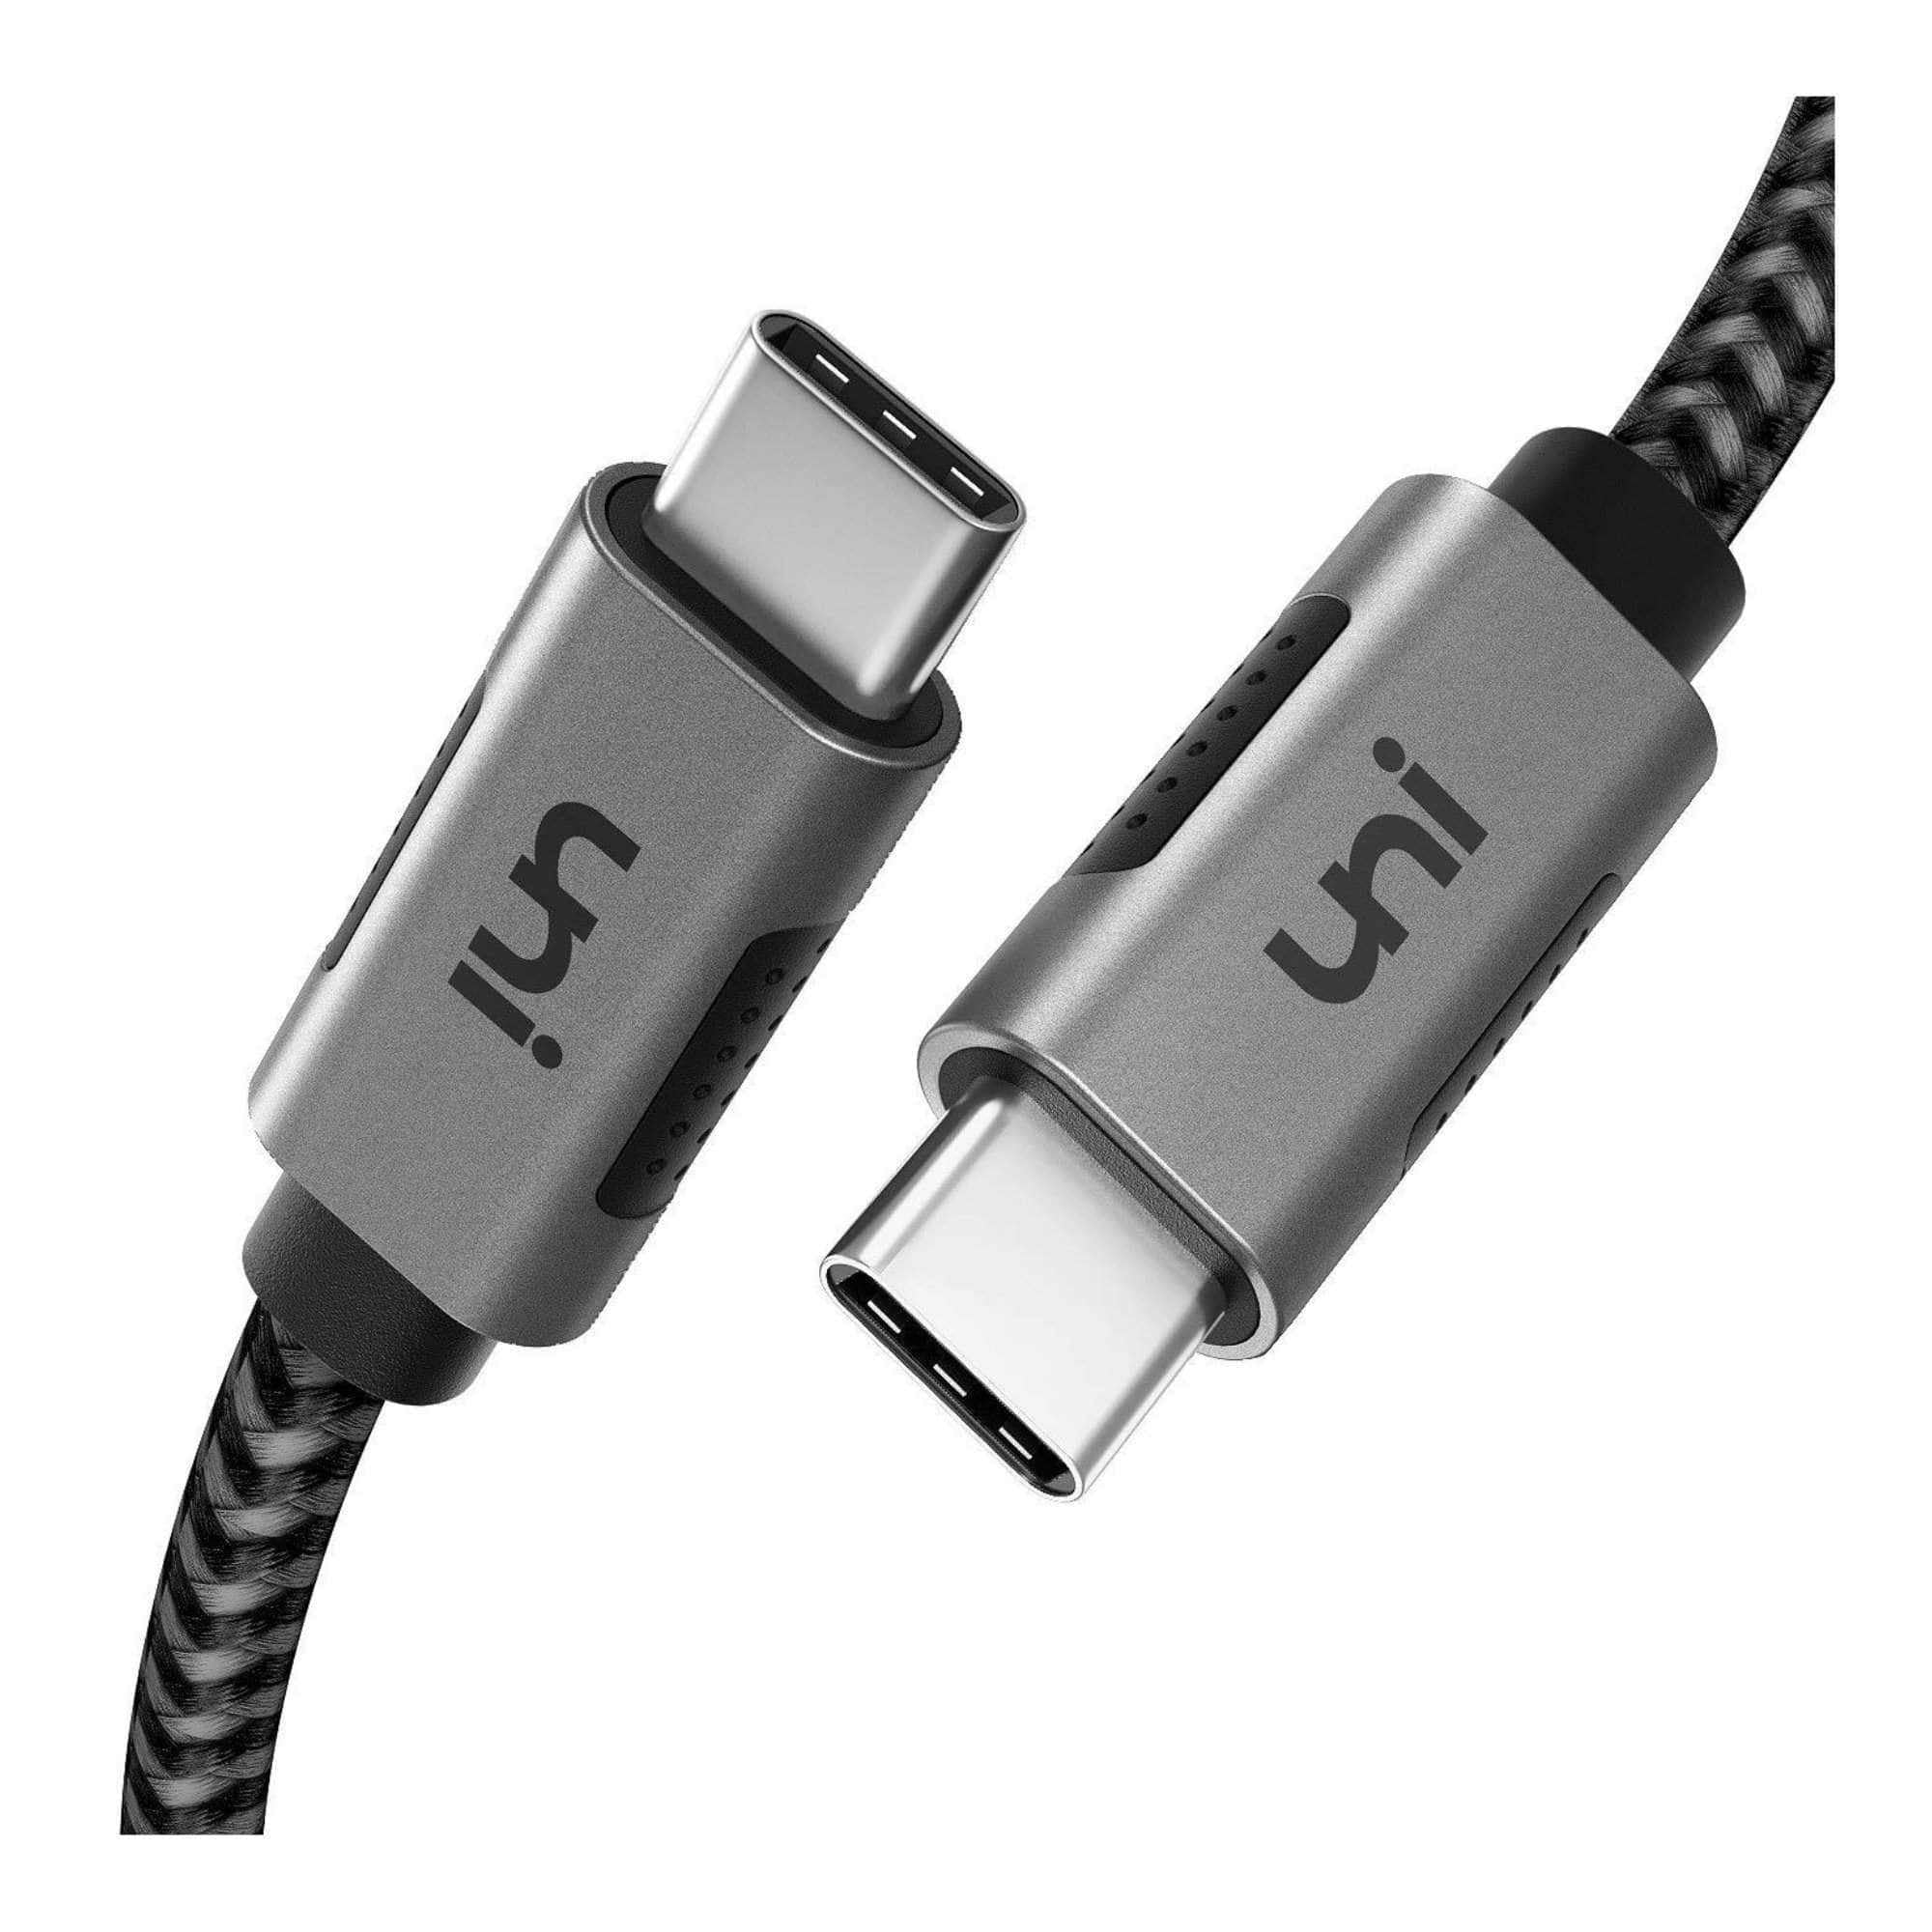 USB C Charger Cable, USB Type C to USB C Video Cable | uni